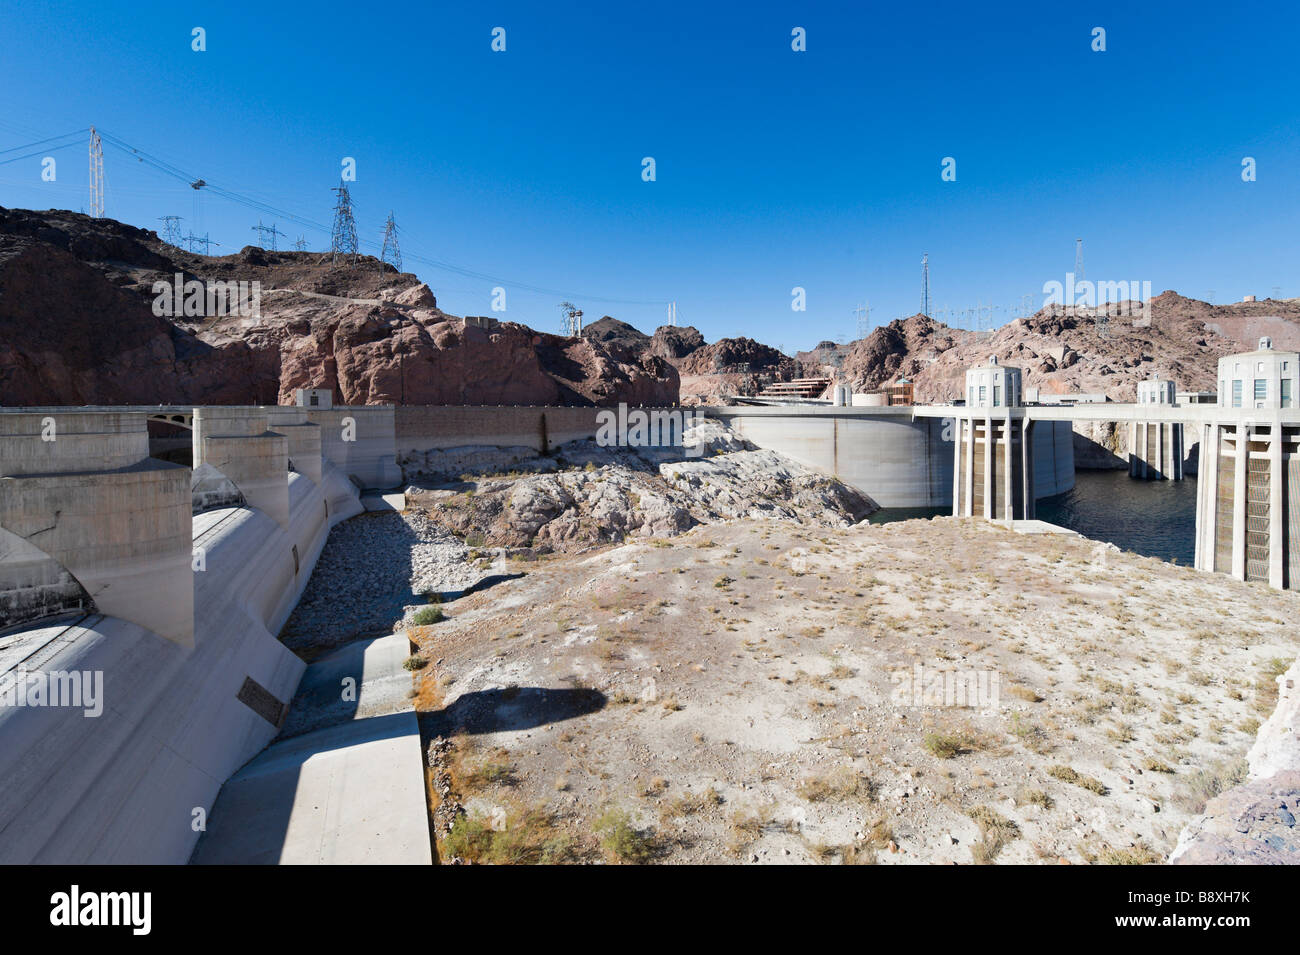 Lake Mead at the Hoover Dam showing the unprecedented low water levels, Arizona/Nevada state border, USA Stock Photo